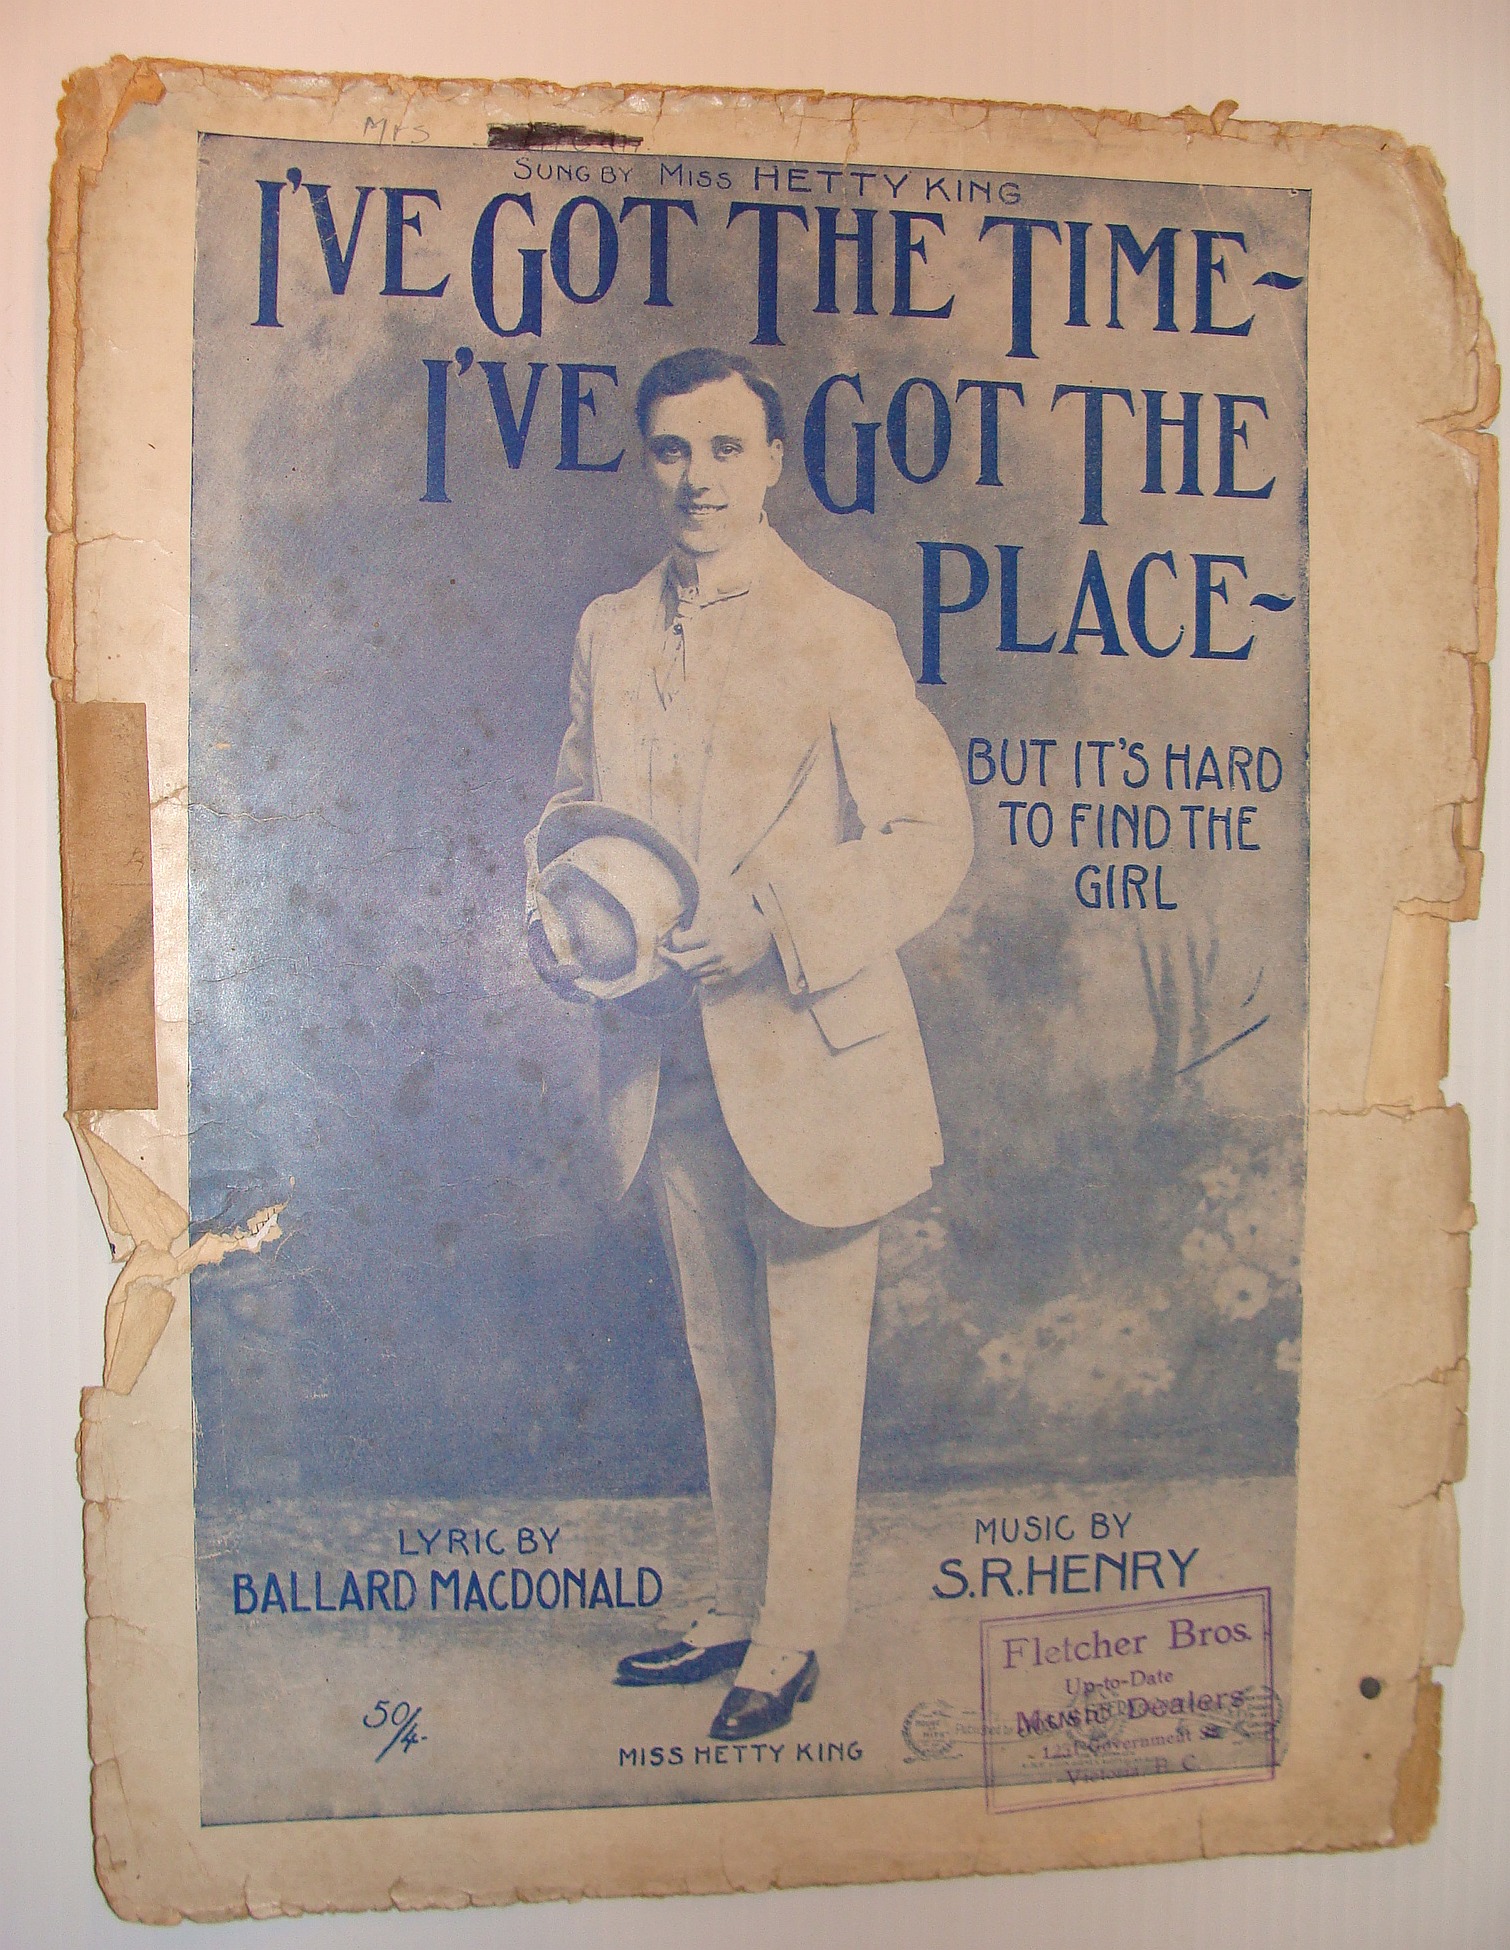 HENRY, S.R.; MACDONALD, BALLARD - I'Ve Got the Time - I'Ve Got the Place - But It's Hard to Find the Right Girl: Sheet Music